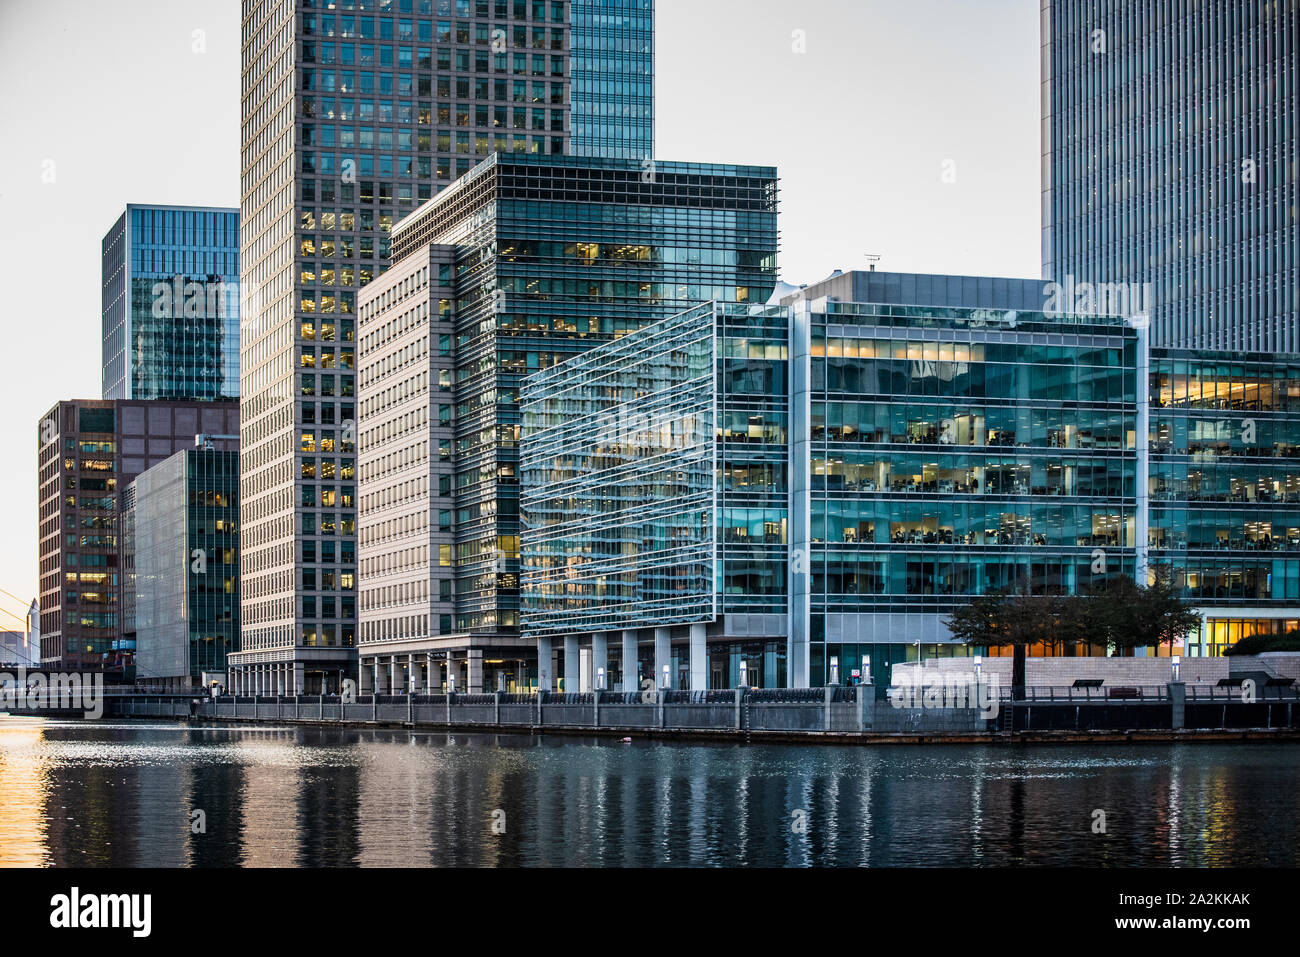 Clifford Chance Londres Canary Wharf Londres - South Dock - Waterside Buildings Canary Wharf South Dock Quayside. Clifford Chance bufete de abogados en primer plano Foto de stock